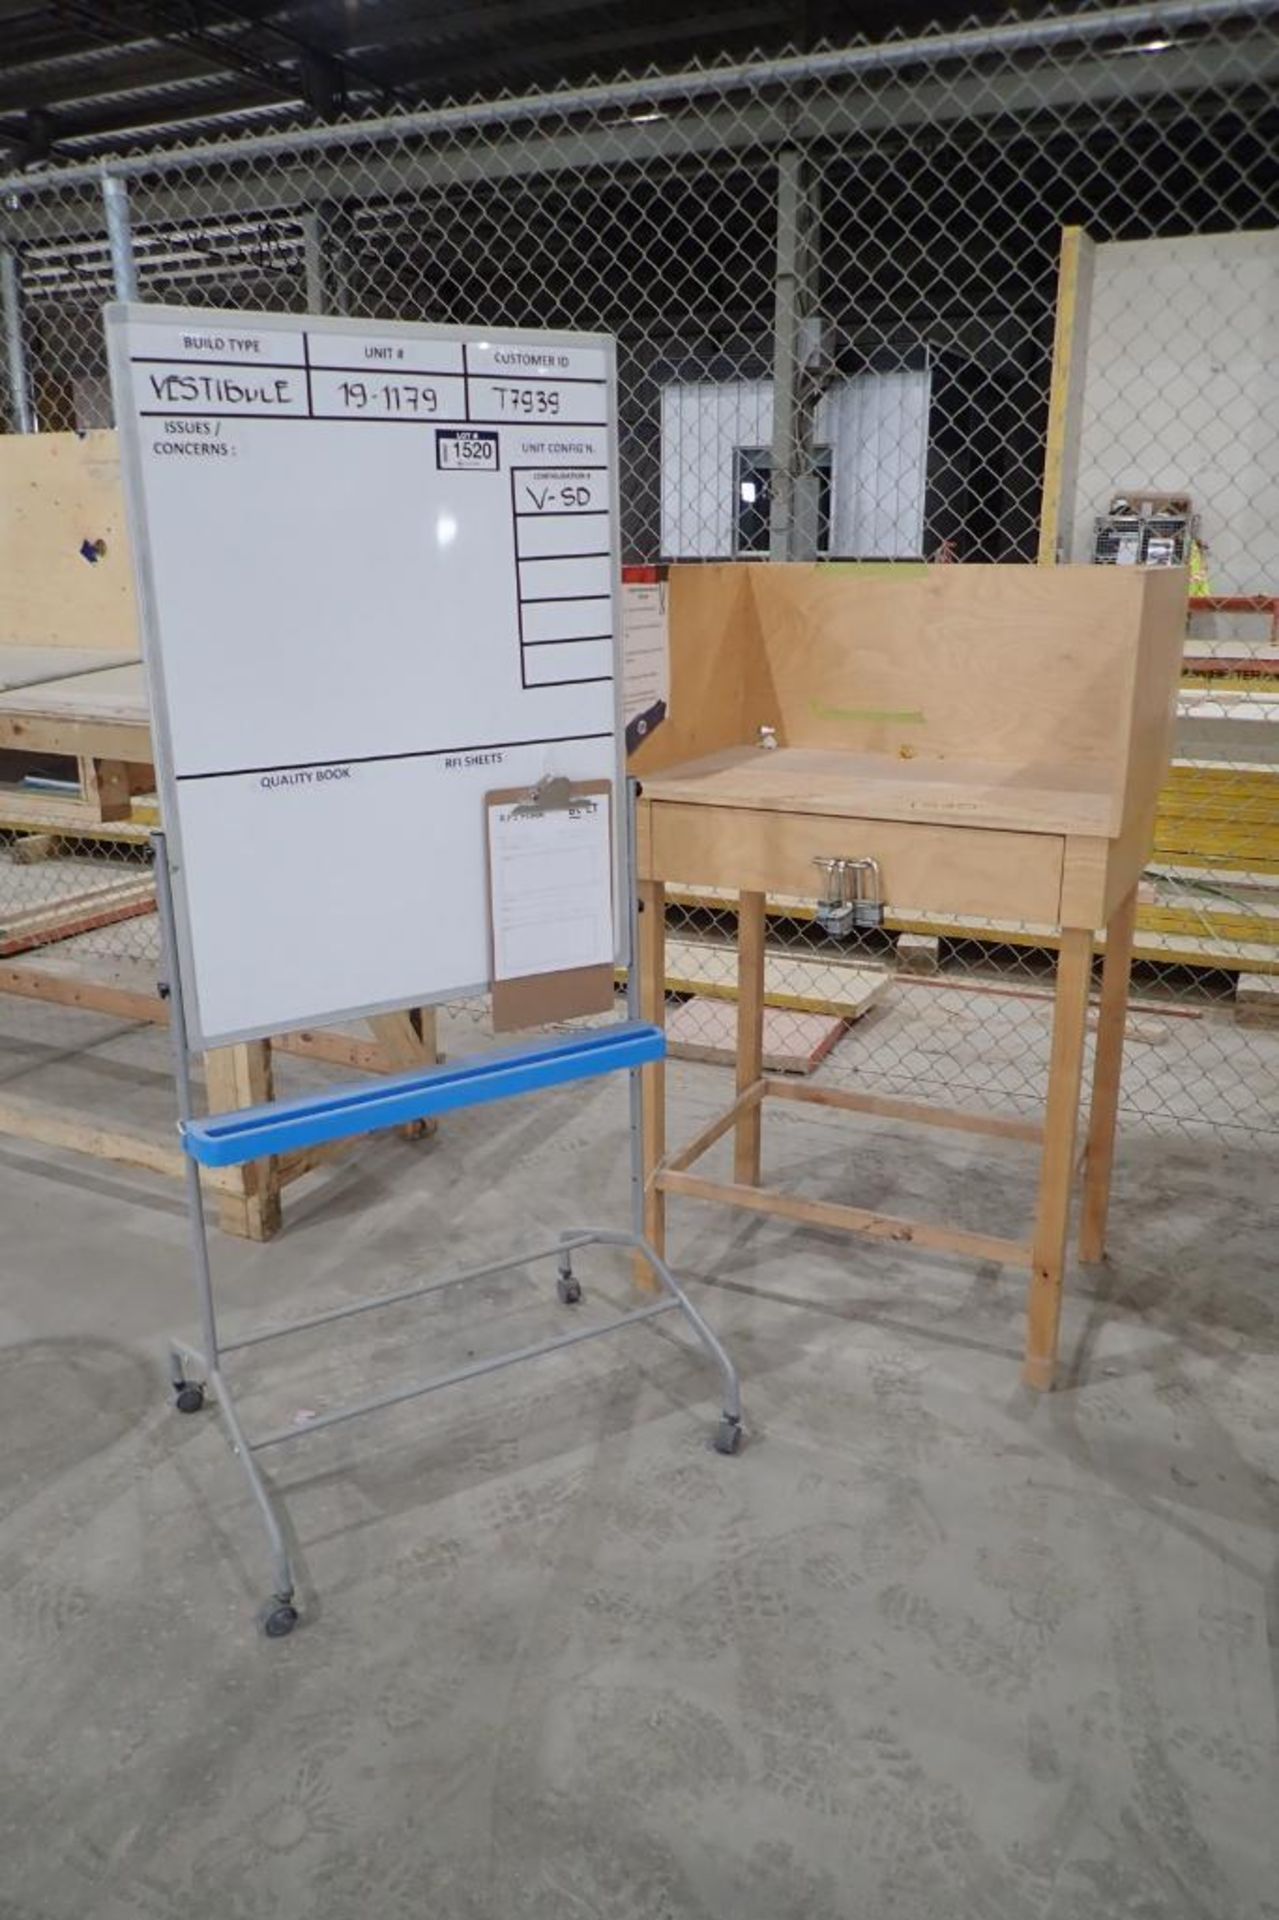 Lot of Work Station and Mobile Job Board.